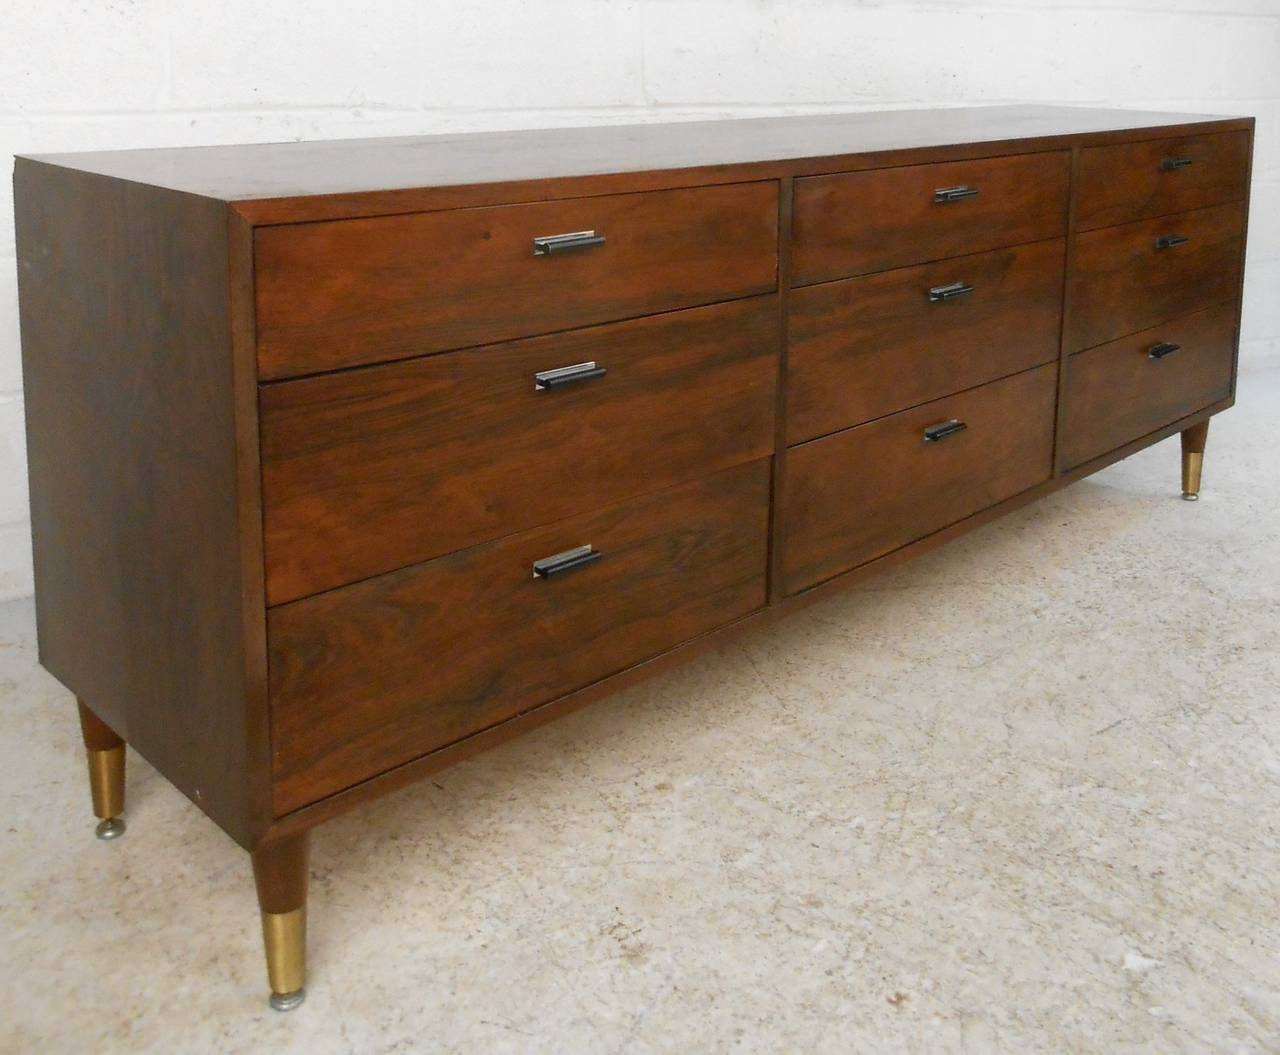 This substantial rosewood dresser features sturdy construction, leveling brass feet, and unique mid-century modern drawer pulls. Rich woodgrain, vintage Harvey Probber style, and plenty of storage make this a wonderful addition to any home or